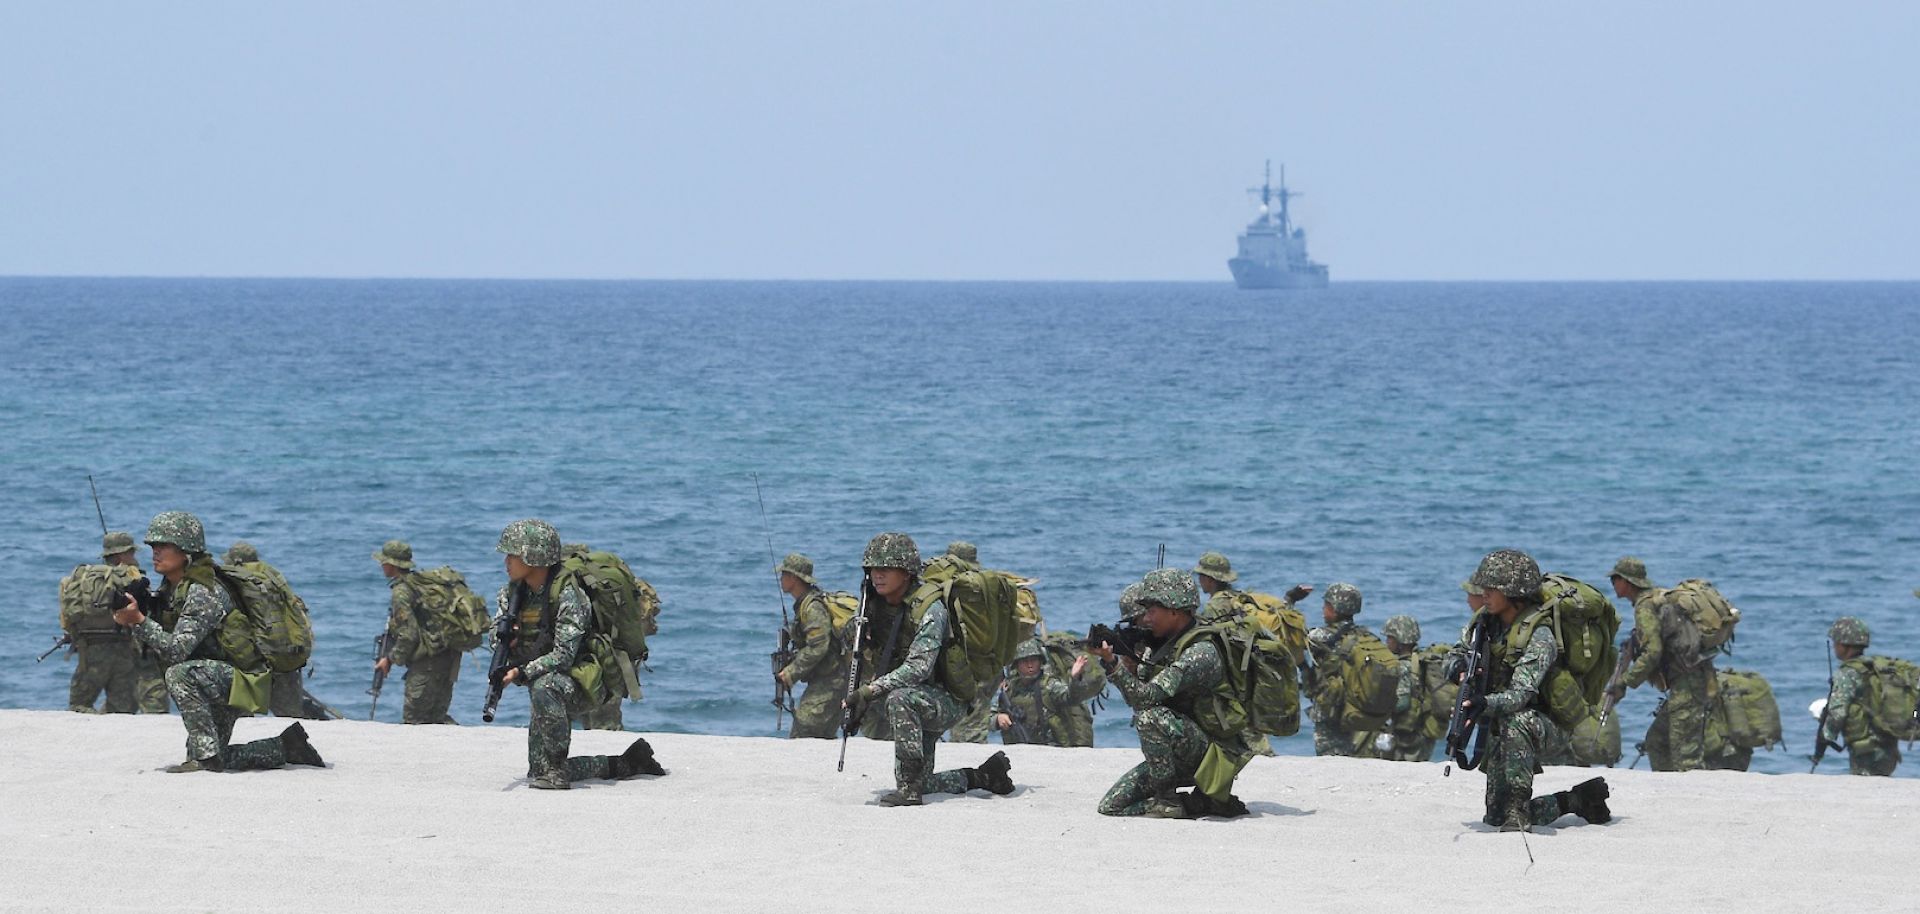 Philippine marines take part in a joint military exercise with their U.S. counterparts at a training camp northwest of Manila in May 2018.